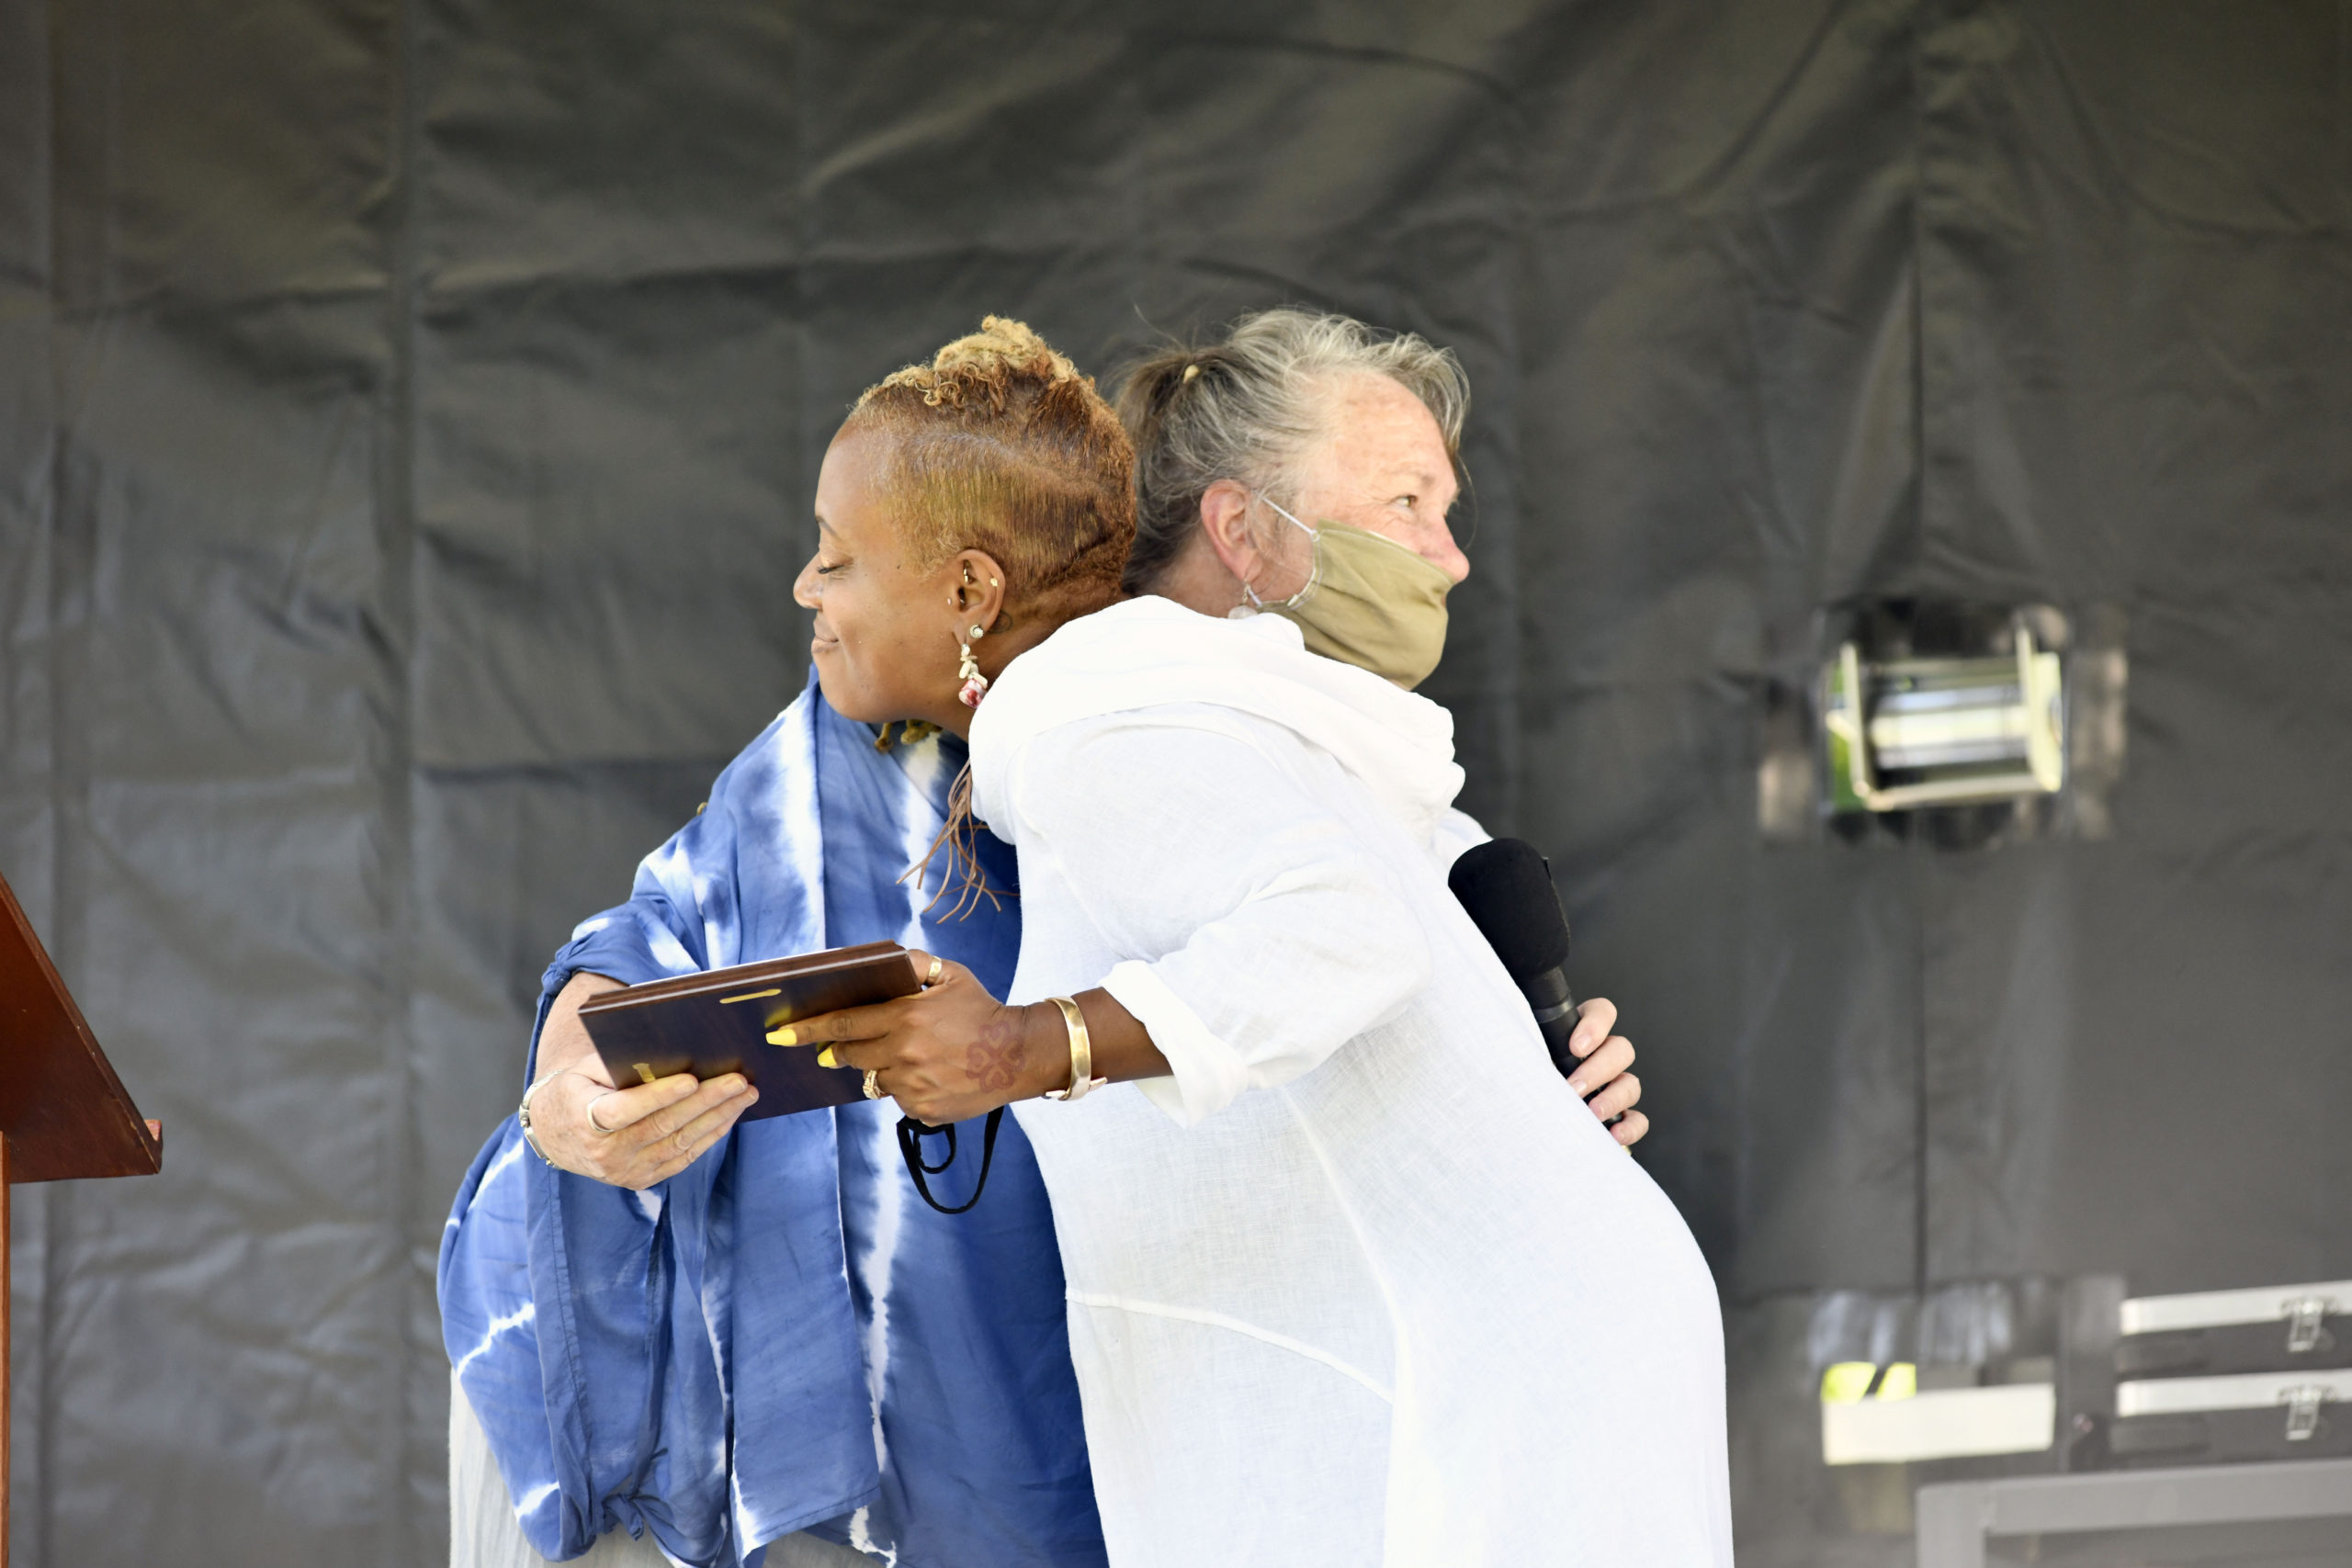 Parishioners and friends and well-wishers came to the grounds of the Southampton Arts Center to bid farewell to Reverend Leslie Duroseau of the Hamptons United Methodist Church in Southampton Village on Sunday. Carol Gilbert Lynch presents Rev. Duroseau with a plaque. DANA SHAW